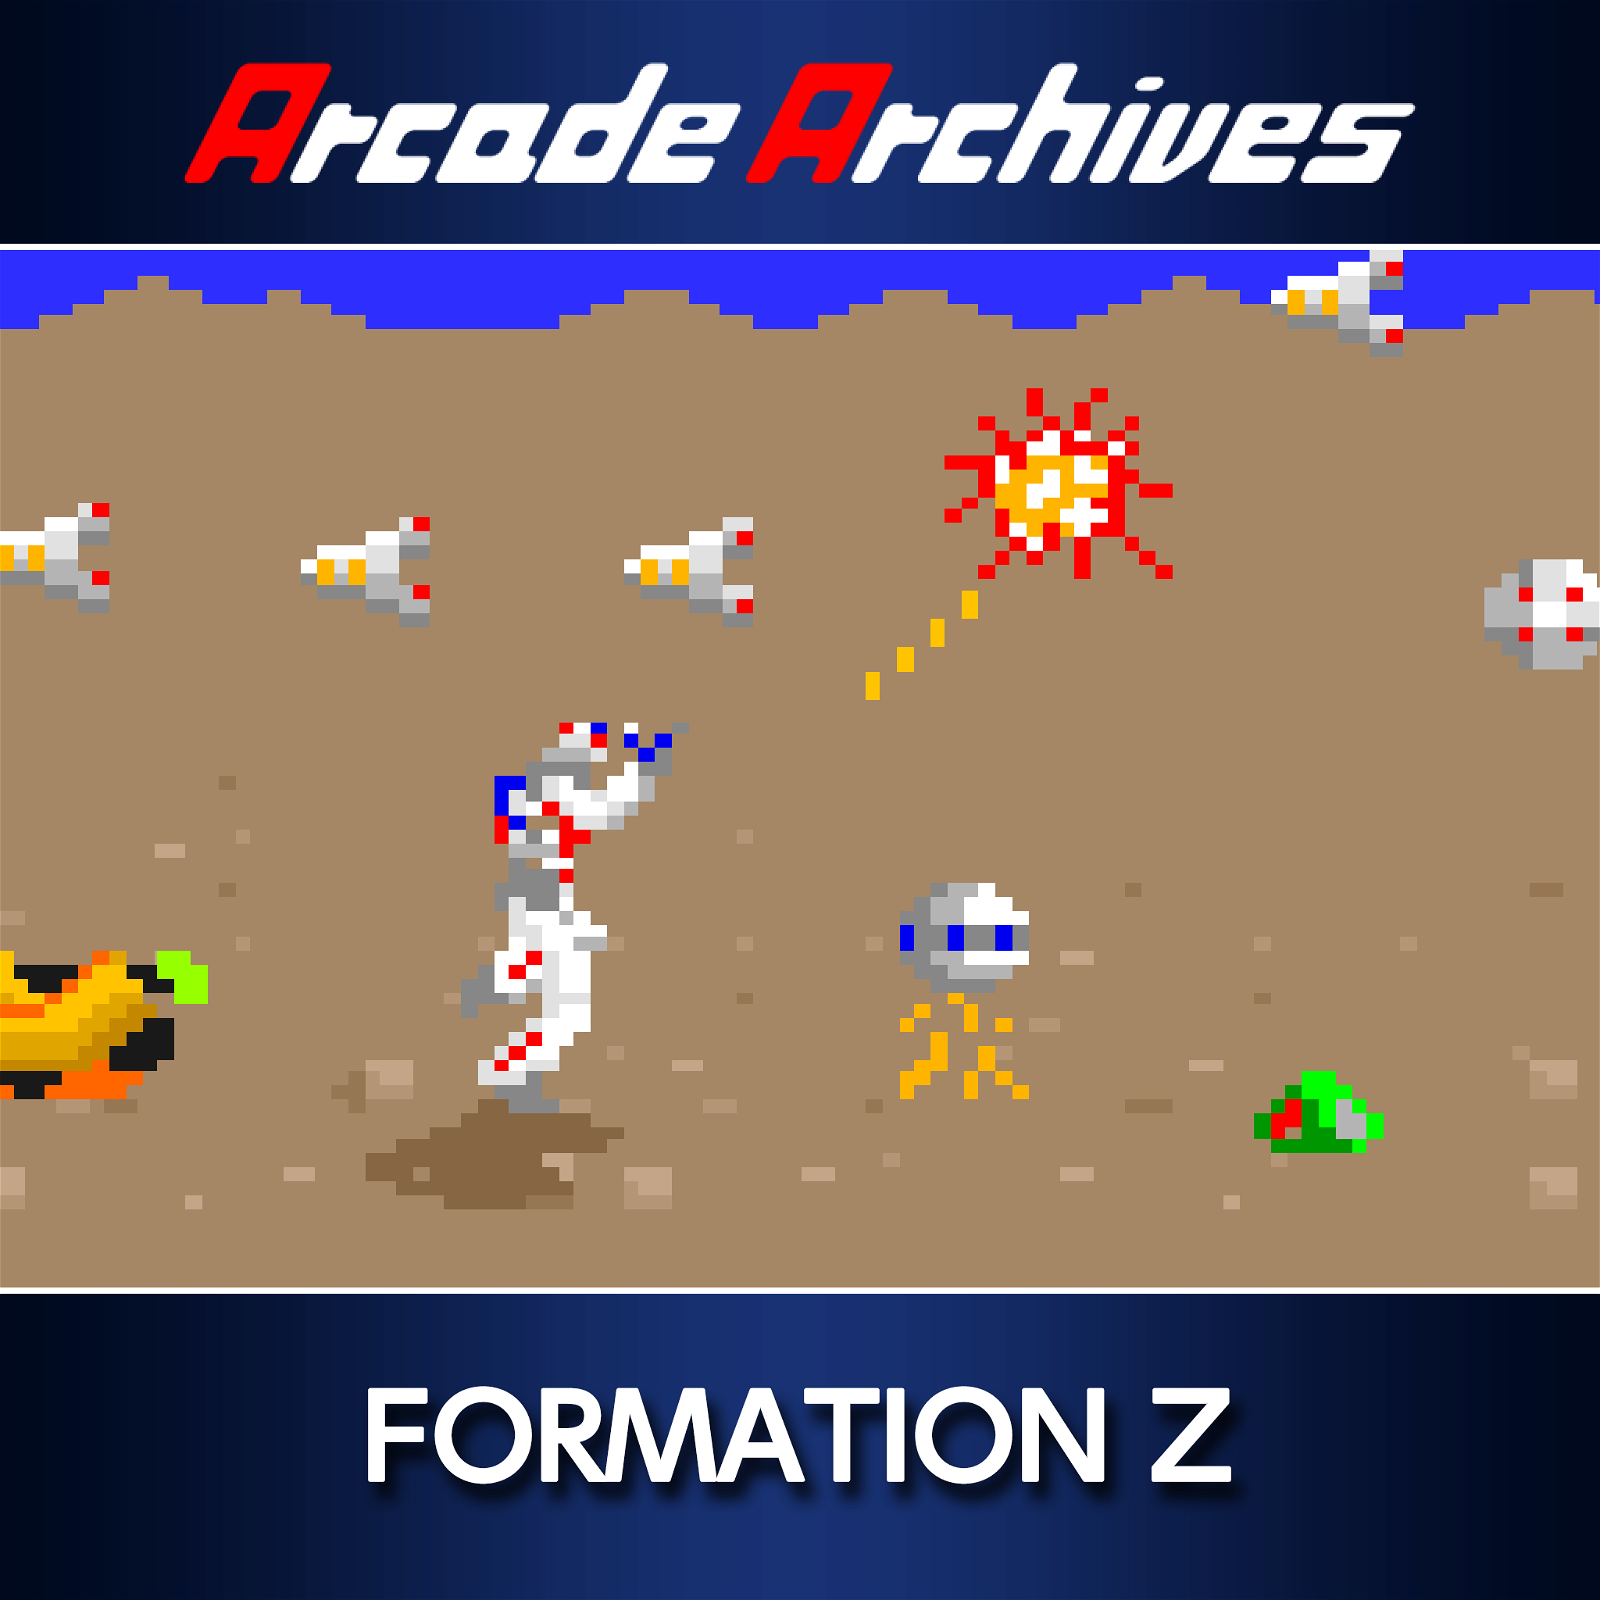 Image of Arcade Archives FORMATION Z